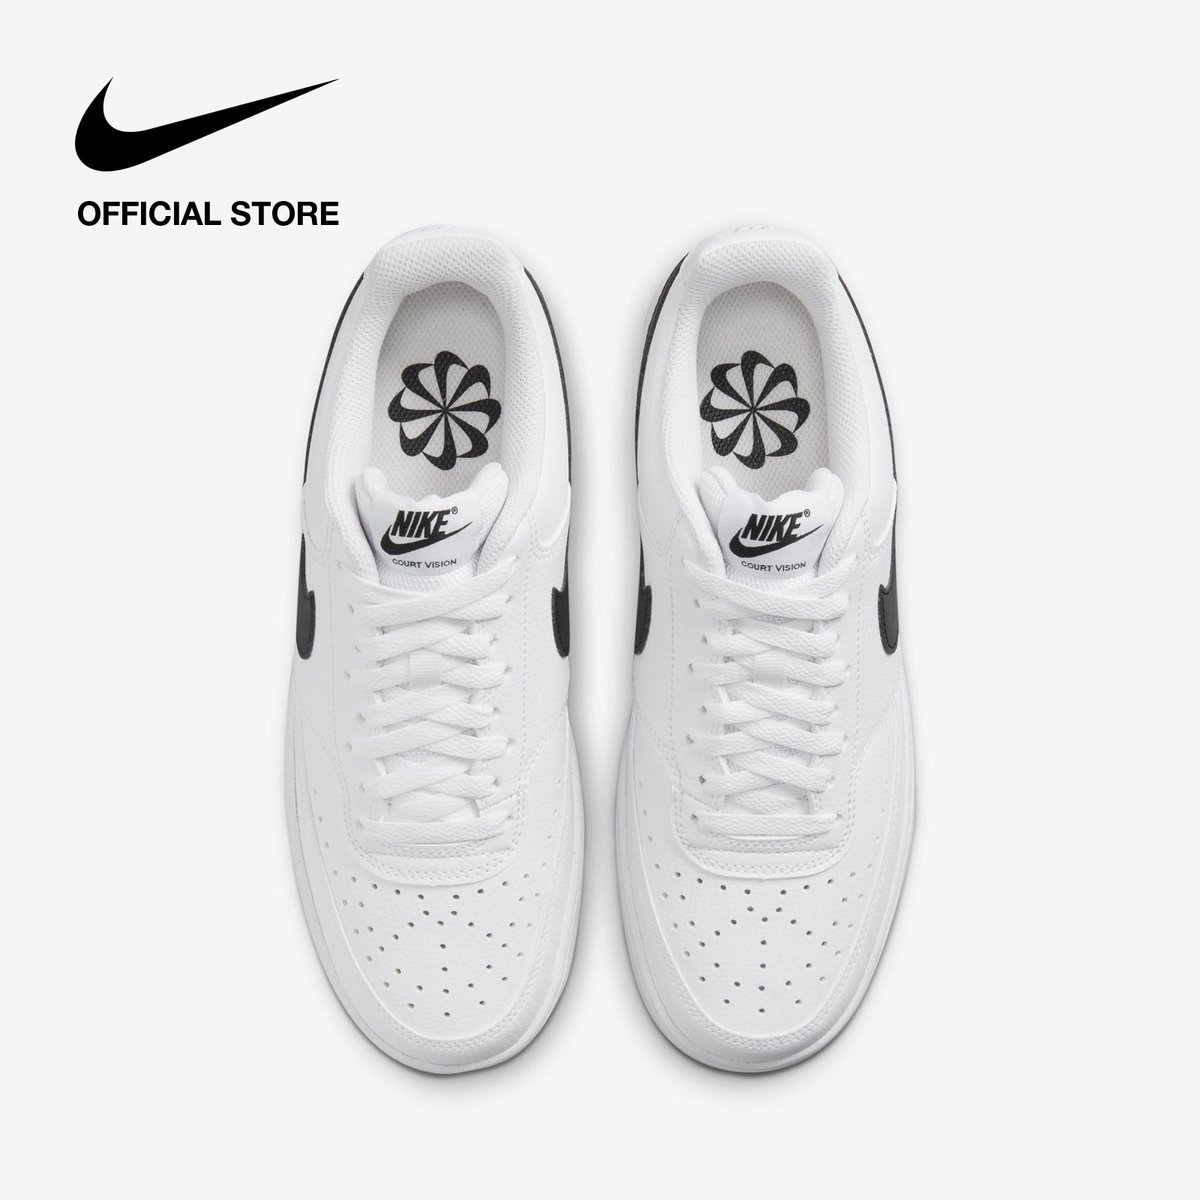 Nike Women's Court Vision Low Next Nature Shoes - White #nikeph #nikewomen #nikecourtvision #sneakerph #kicksph #sneakerhead Product Price: ₱2,895 Free shipping | cash on delivery 🔗shop it here s.lazada.com.ph/s.hUNAP?cc